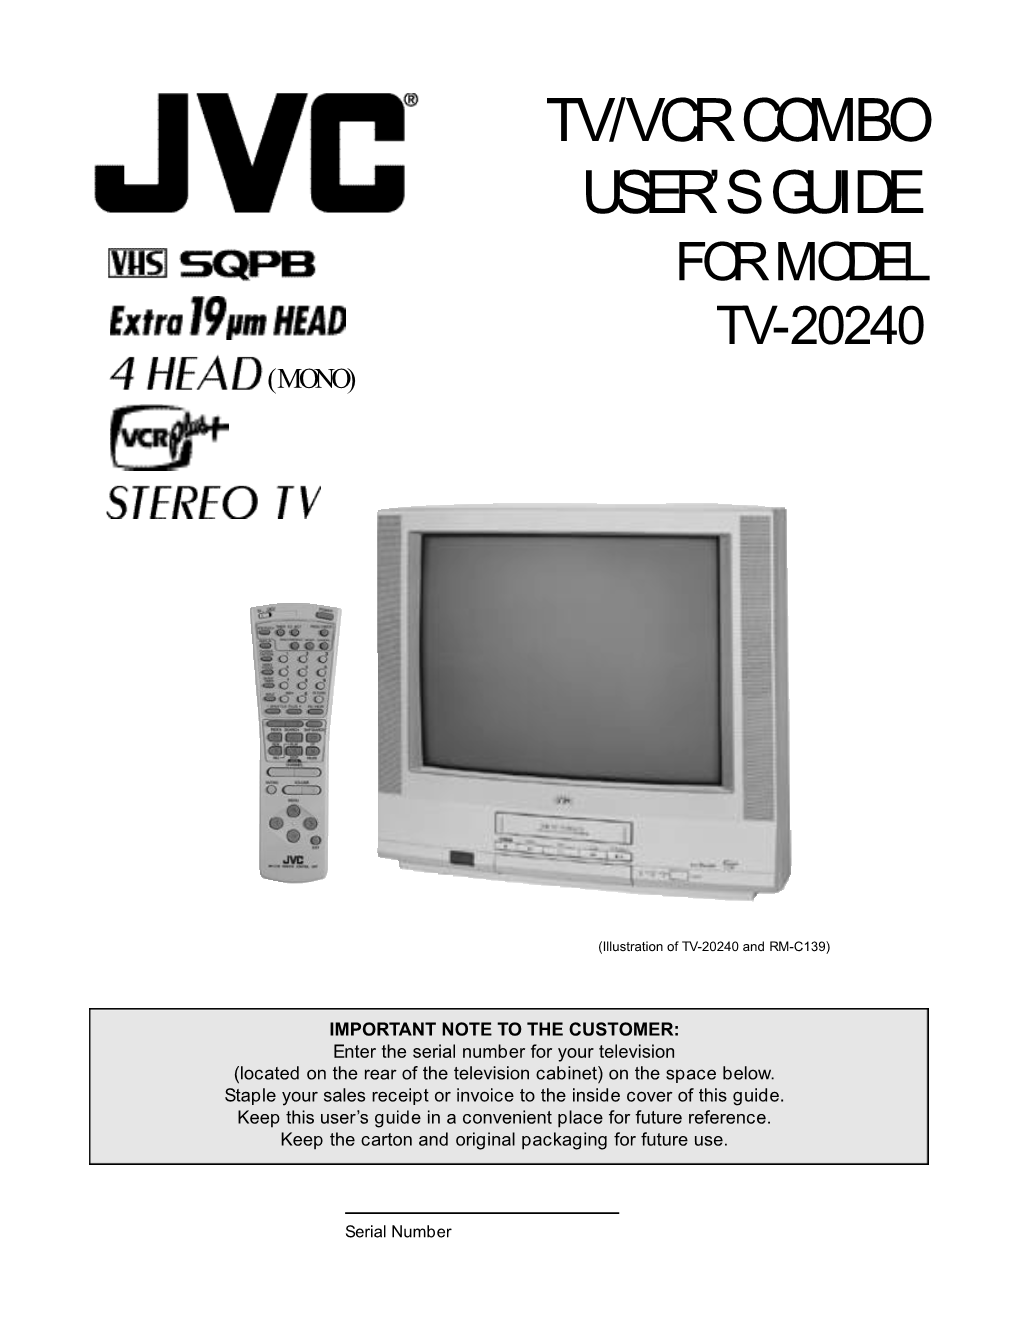 Tv/Vcr Combo User's Guide